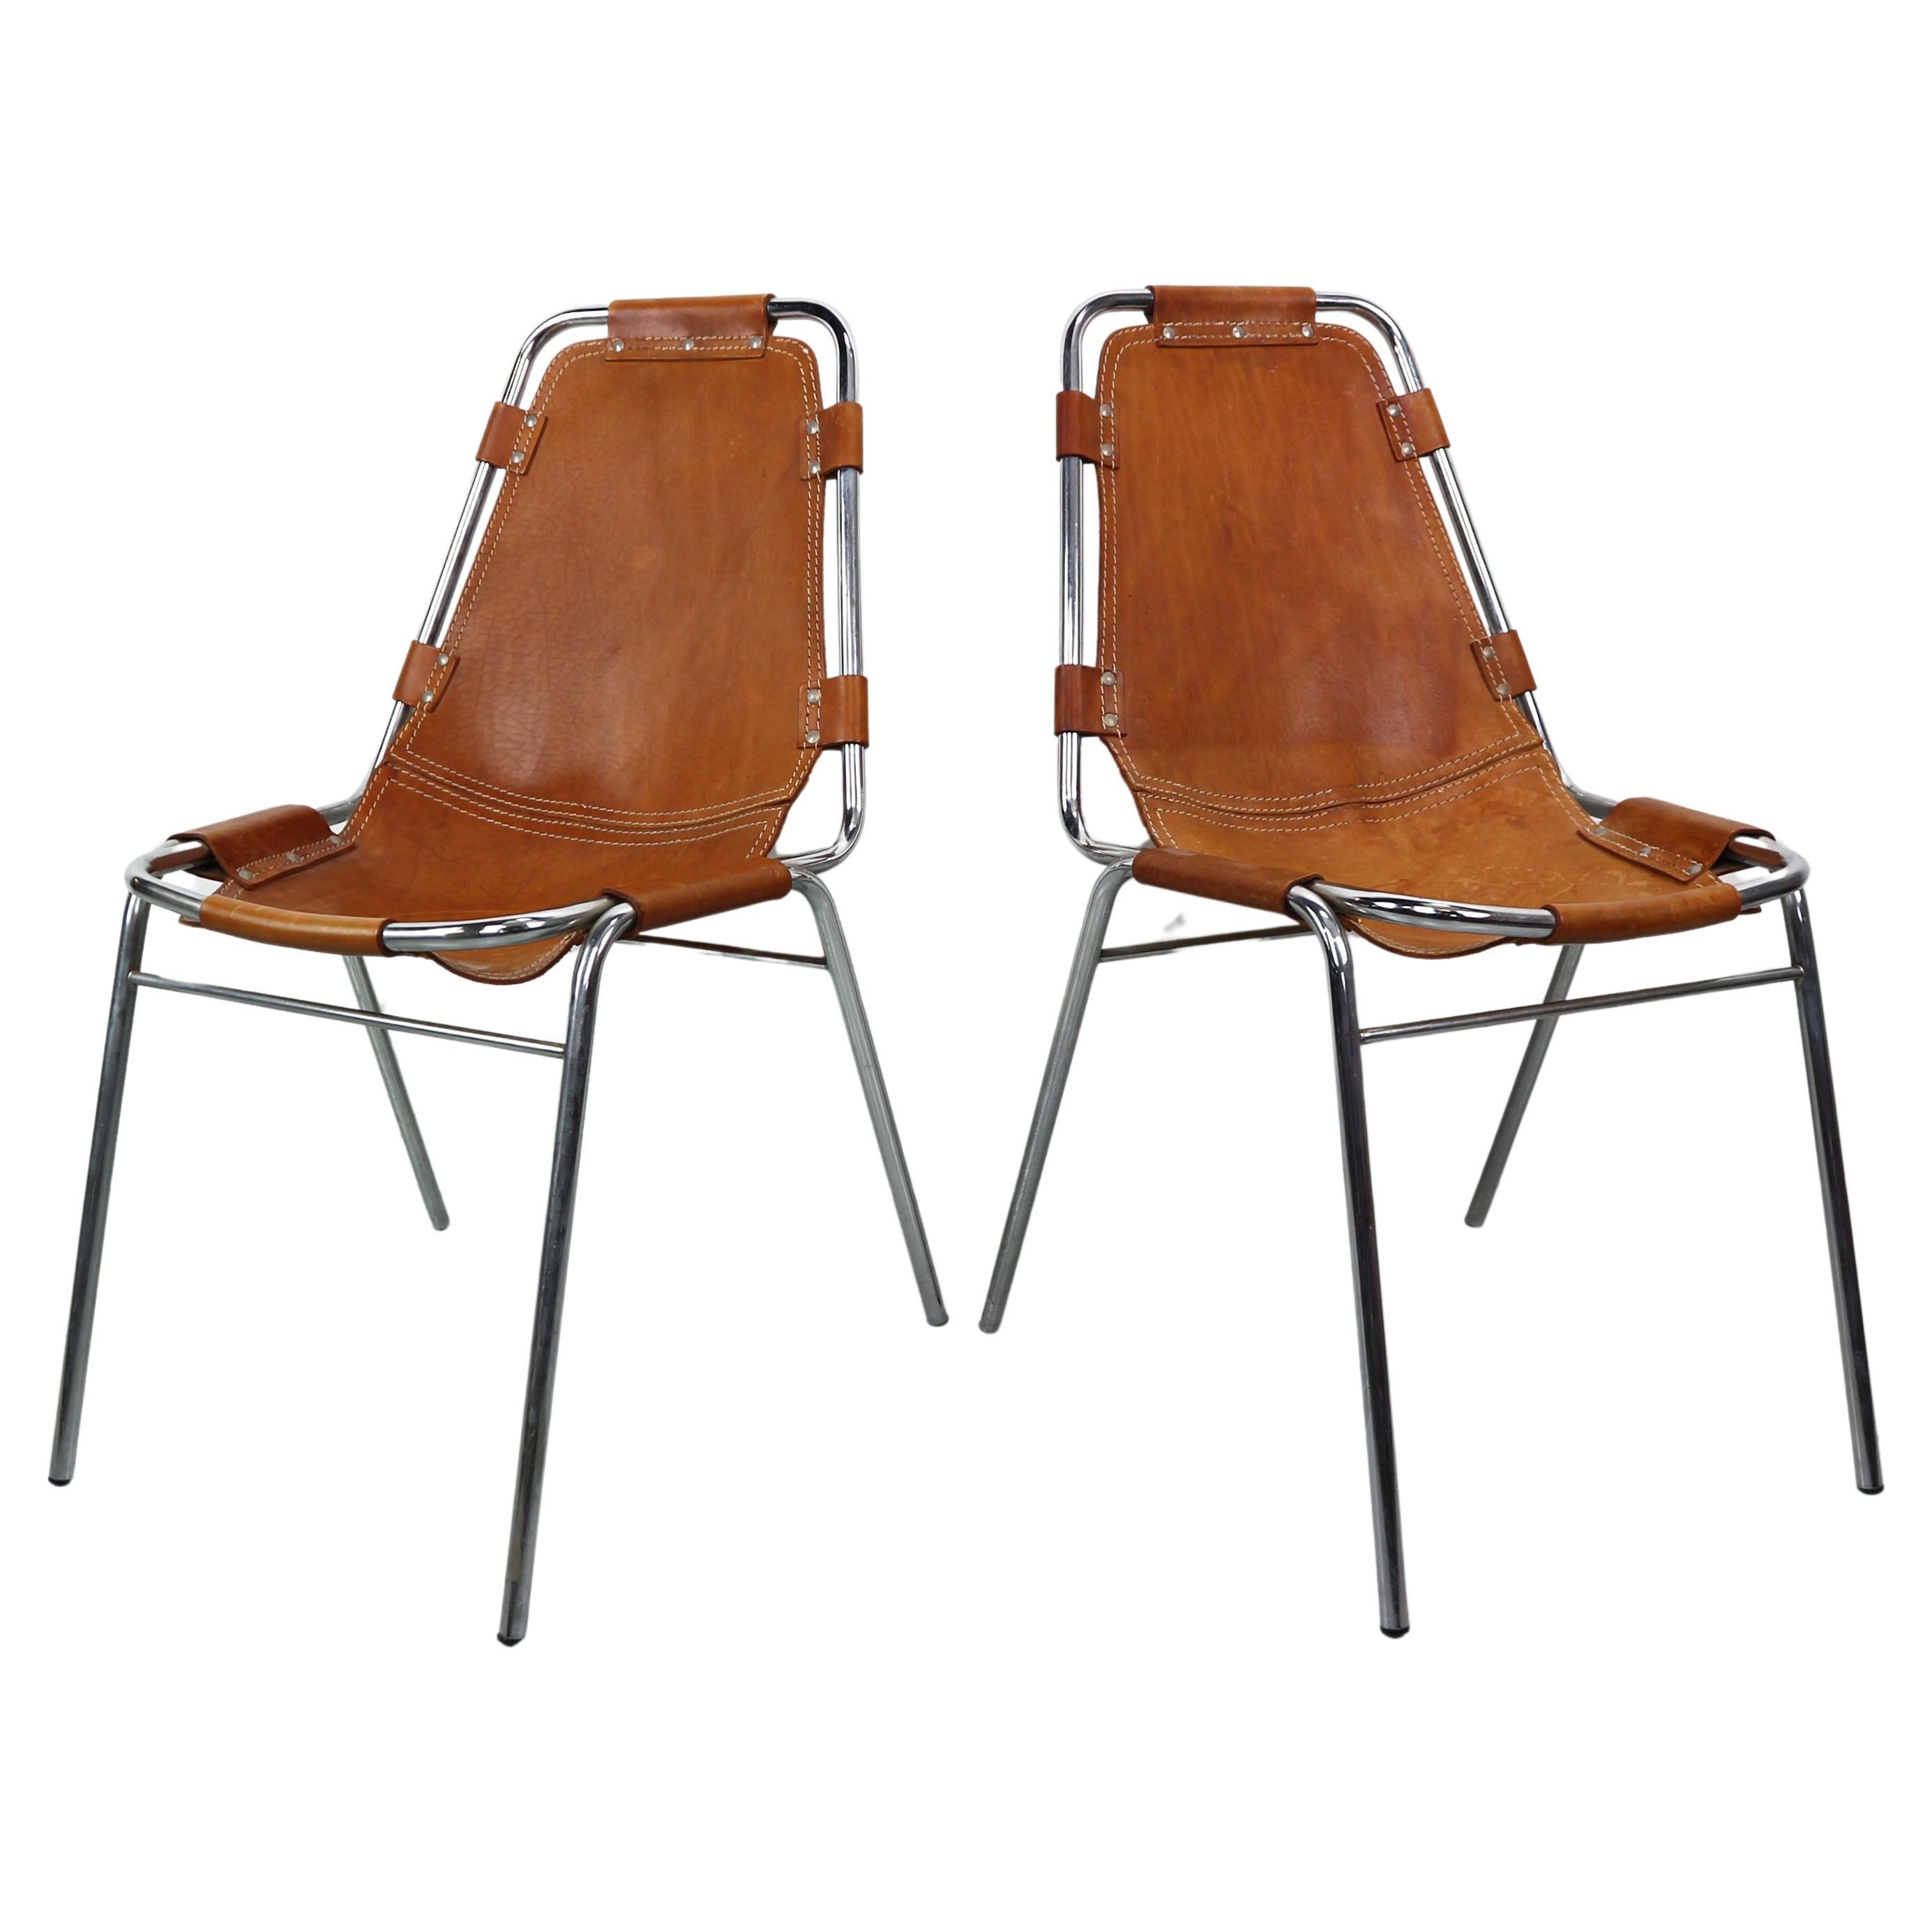 Charlotte Perriand for "Les Arc" Set of 2 Original Leather side chairs, 1960 For Sale